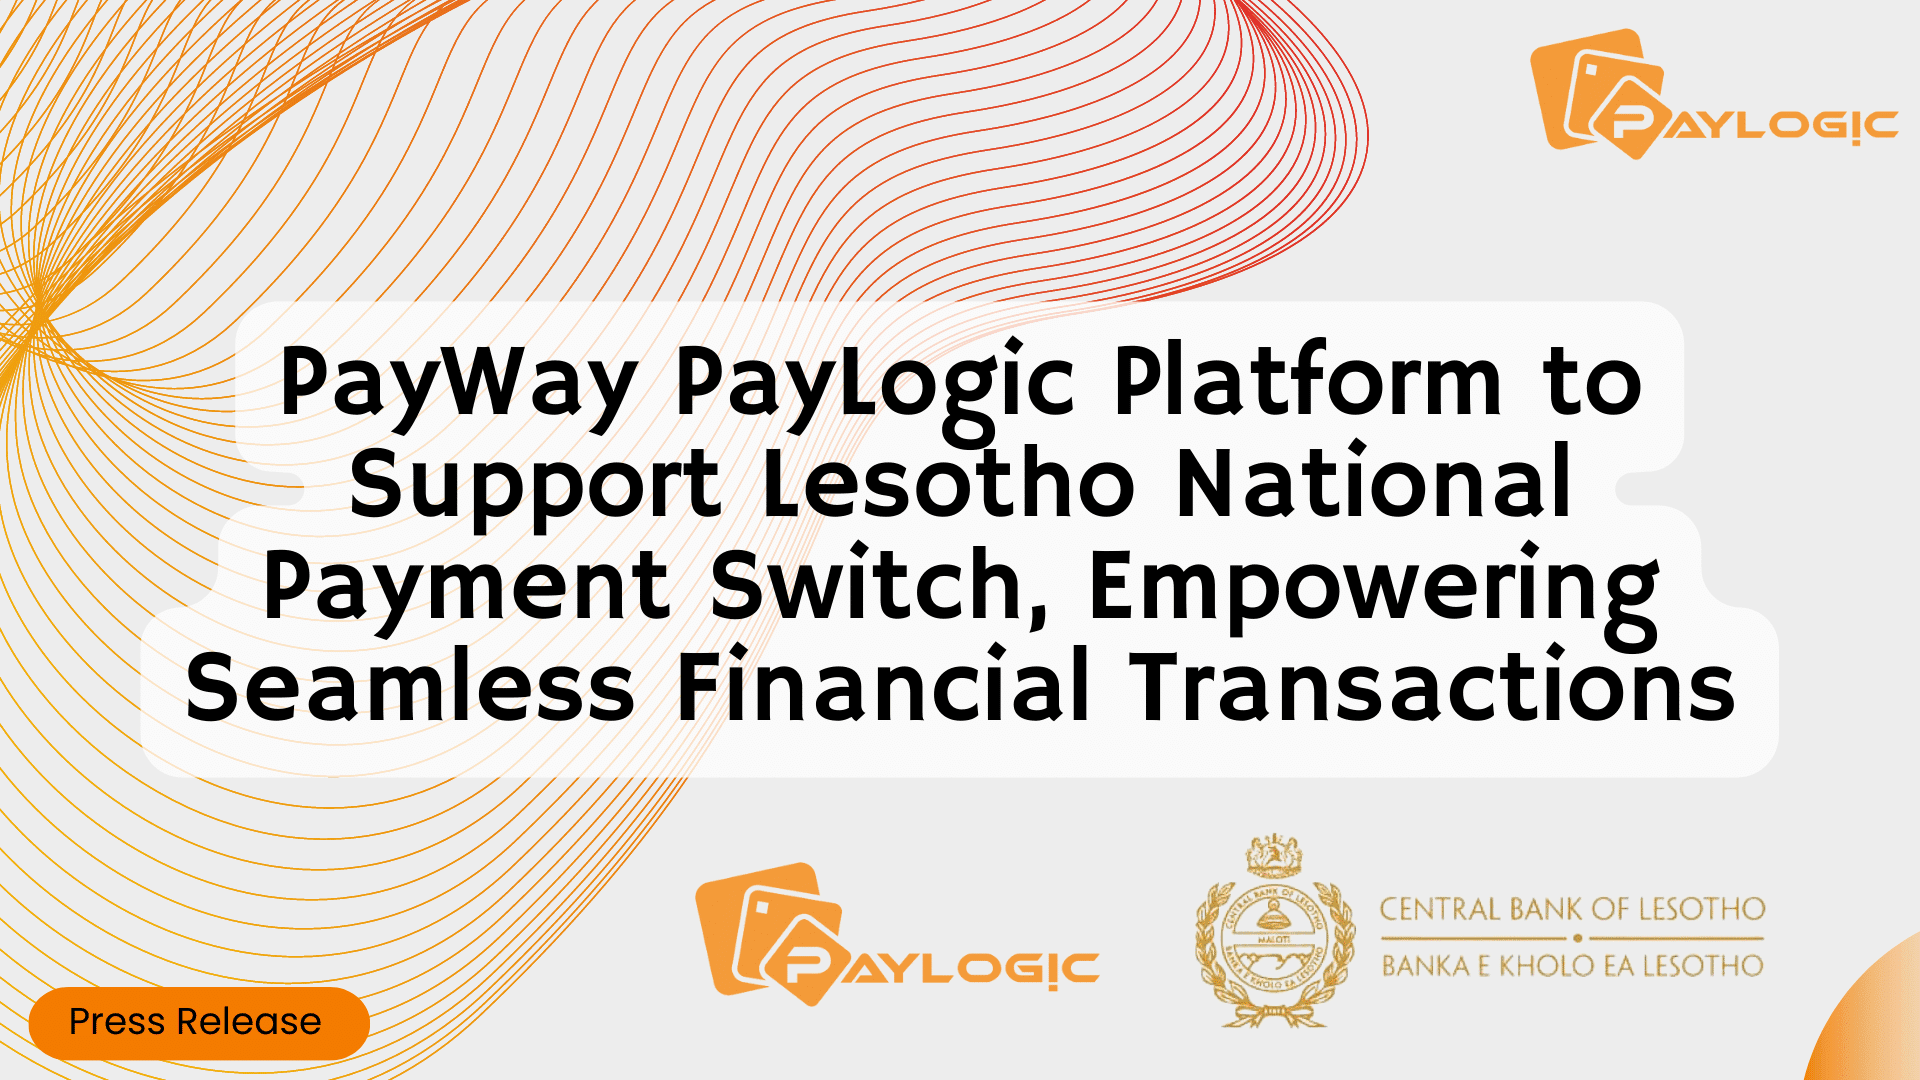 PayWay PayLogic Platform to Support Lesotho National Payment Switch, Empowering Seamless Financial Transactions